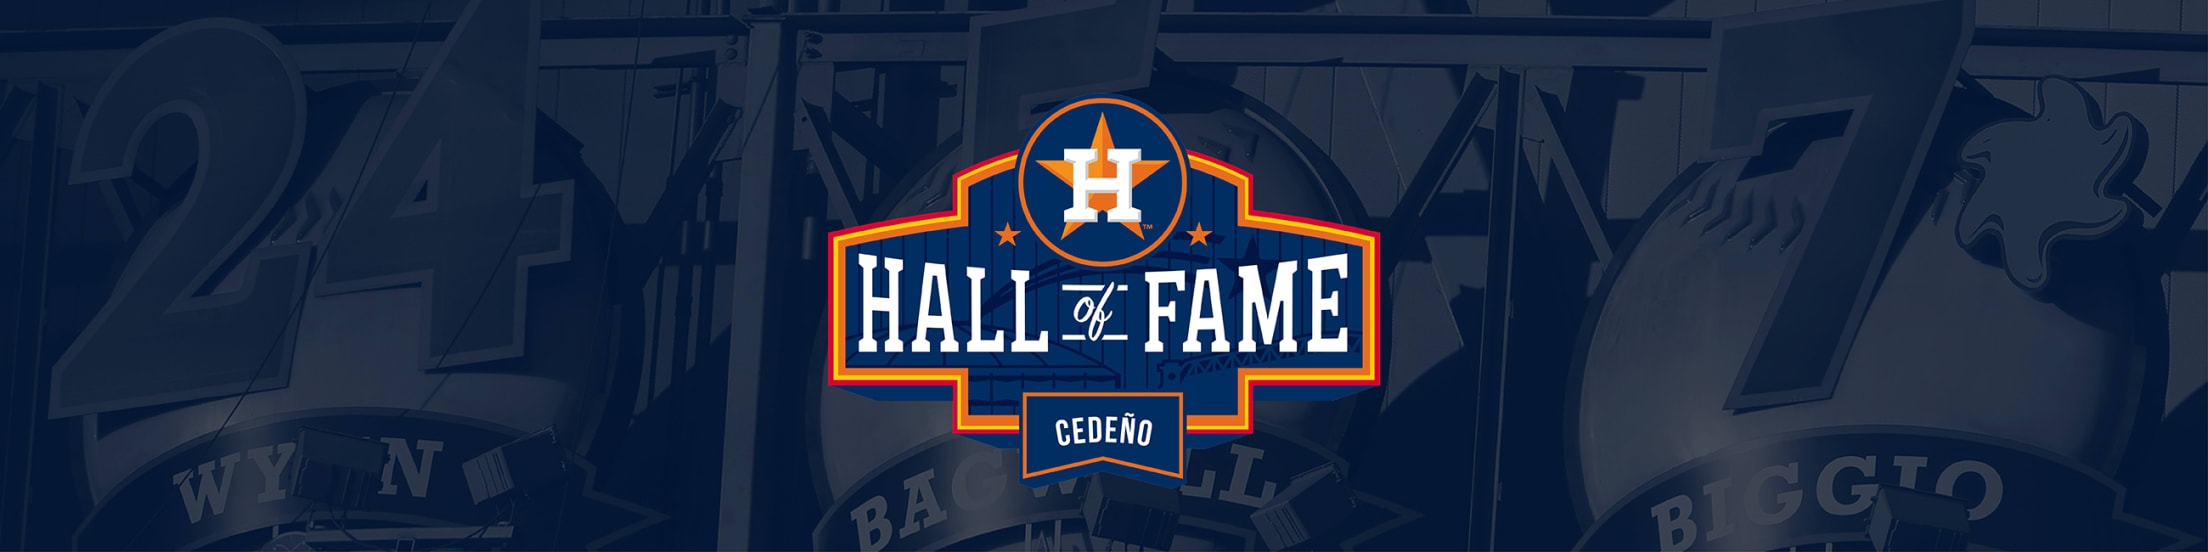 Not in Hall of Fame - 5. Cesar Cedeno